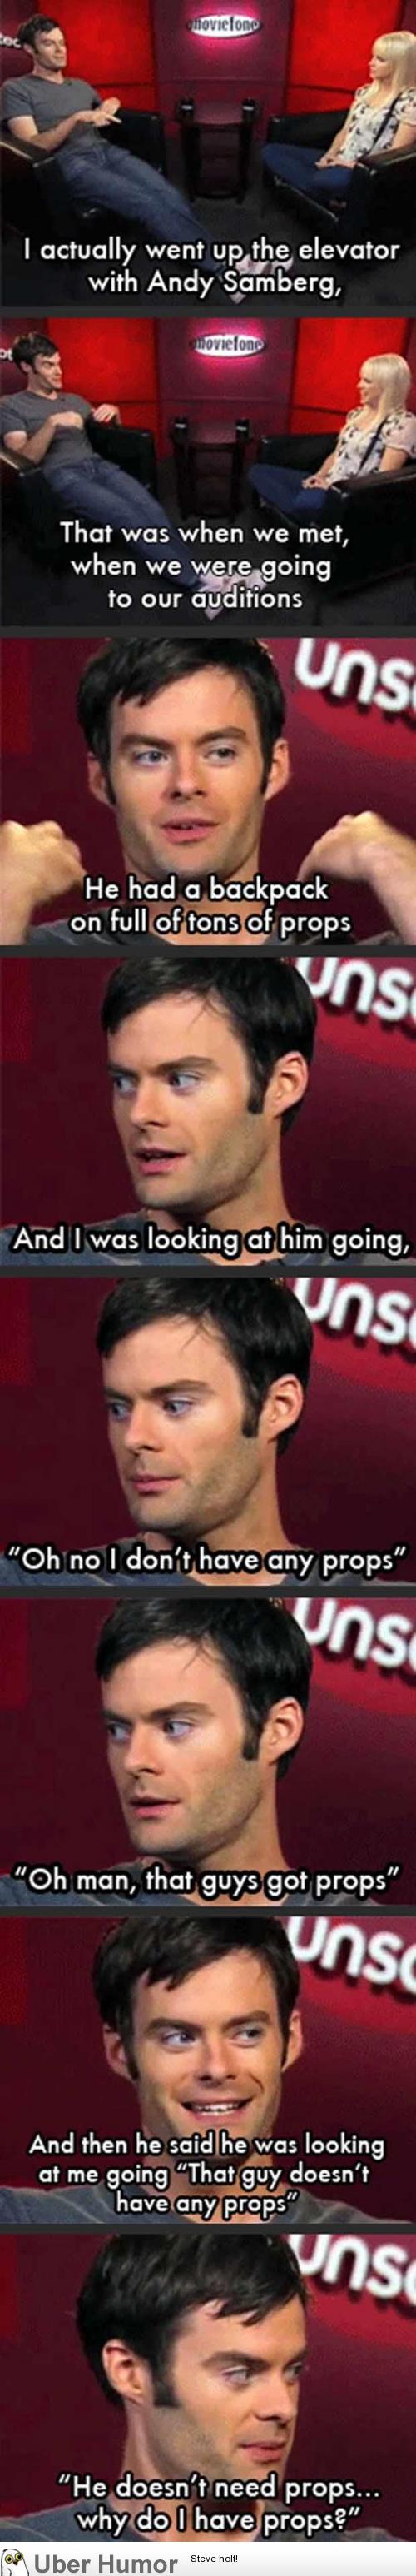 Bill Hader talks about when he went to audition for SNL and met Andy Samberg  | Funny Pictures, Quotes, Pics, Photos, Images. Videos of Really Very Cute  animals.